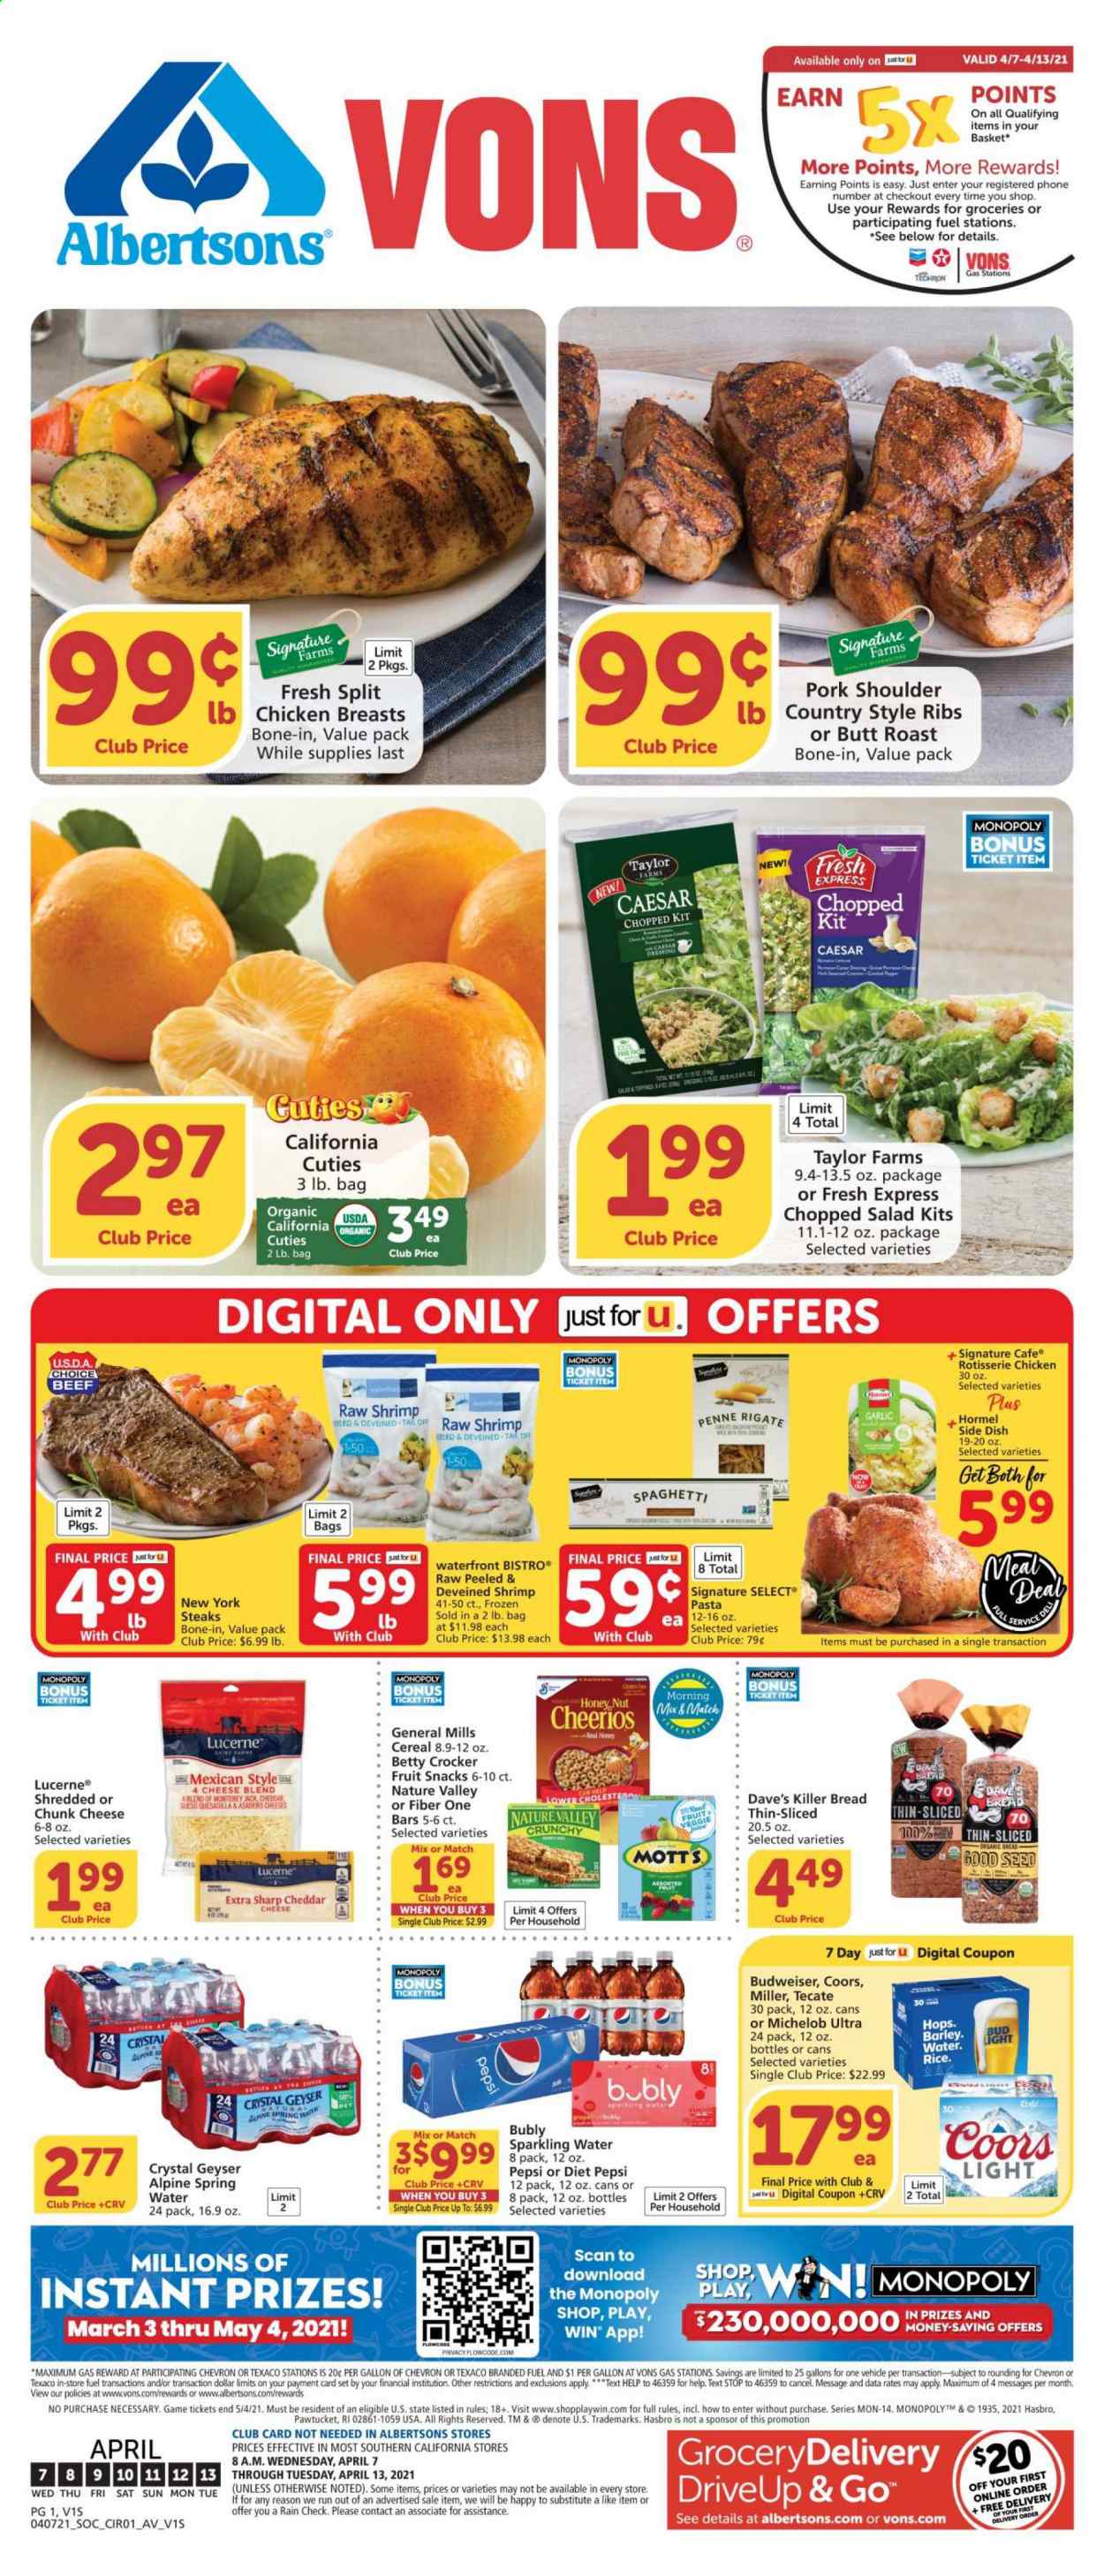 thumbnail - Vons Flyer - 04/07/2021 - 04/13/2021 - Sales products - bread, salad, chopped salad, chicken breasts, steak, pork meat, pork shoulder, country style ribs, shrimps, Hormel, cheddar, cheese, chunk cheese, fruit snack, cereals, Cheerios, Nature Valley, Fiber One, spaghetti, pasta, penne, Pepsi, Diet Pepsi, Mott's, spring water, sparkling water, beer, Budweiser, Coors, Michelob, Miller, Sharp, plant seeds. Page 1.